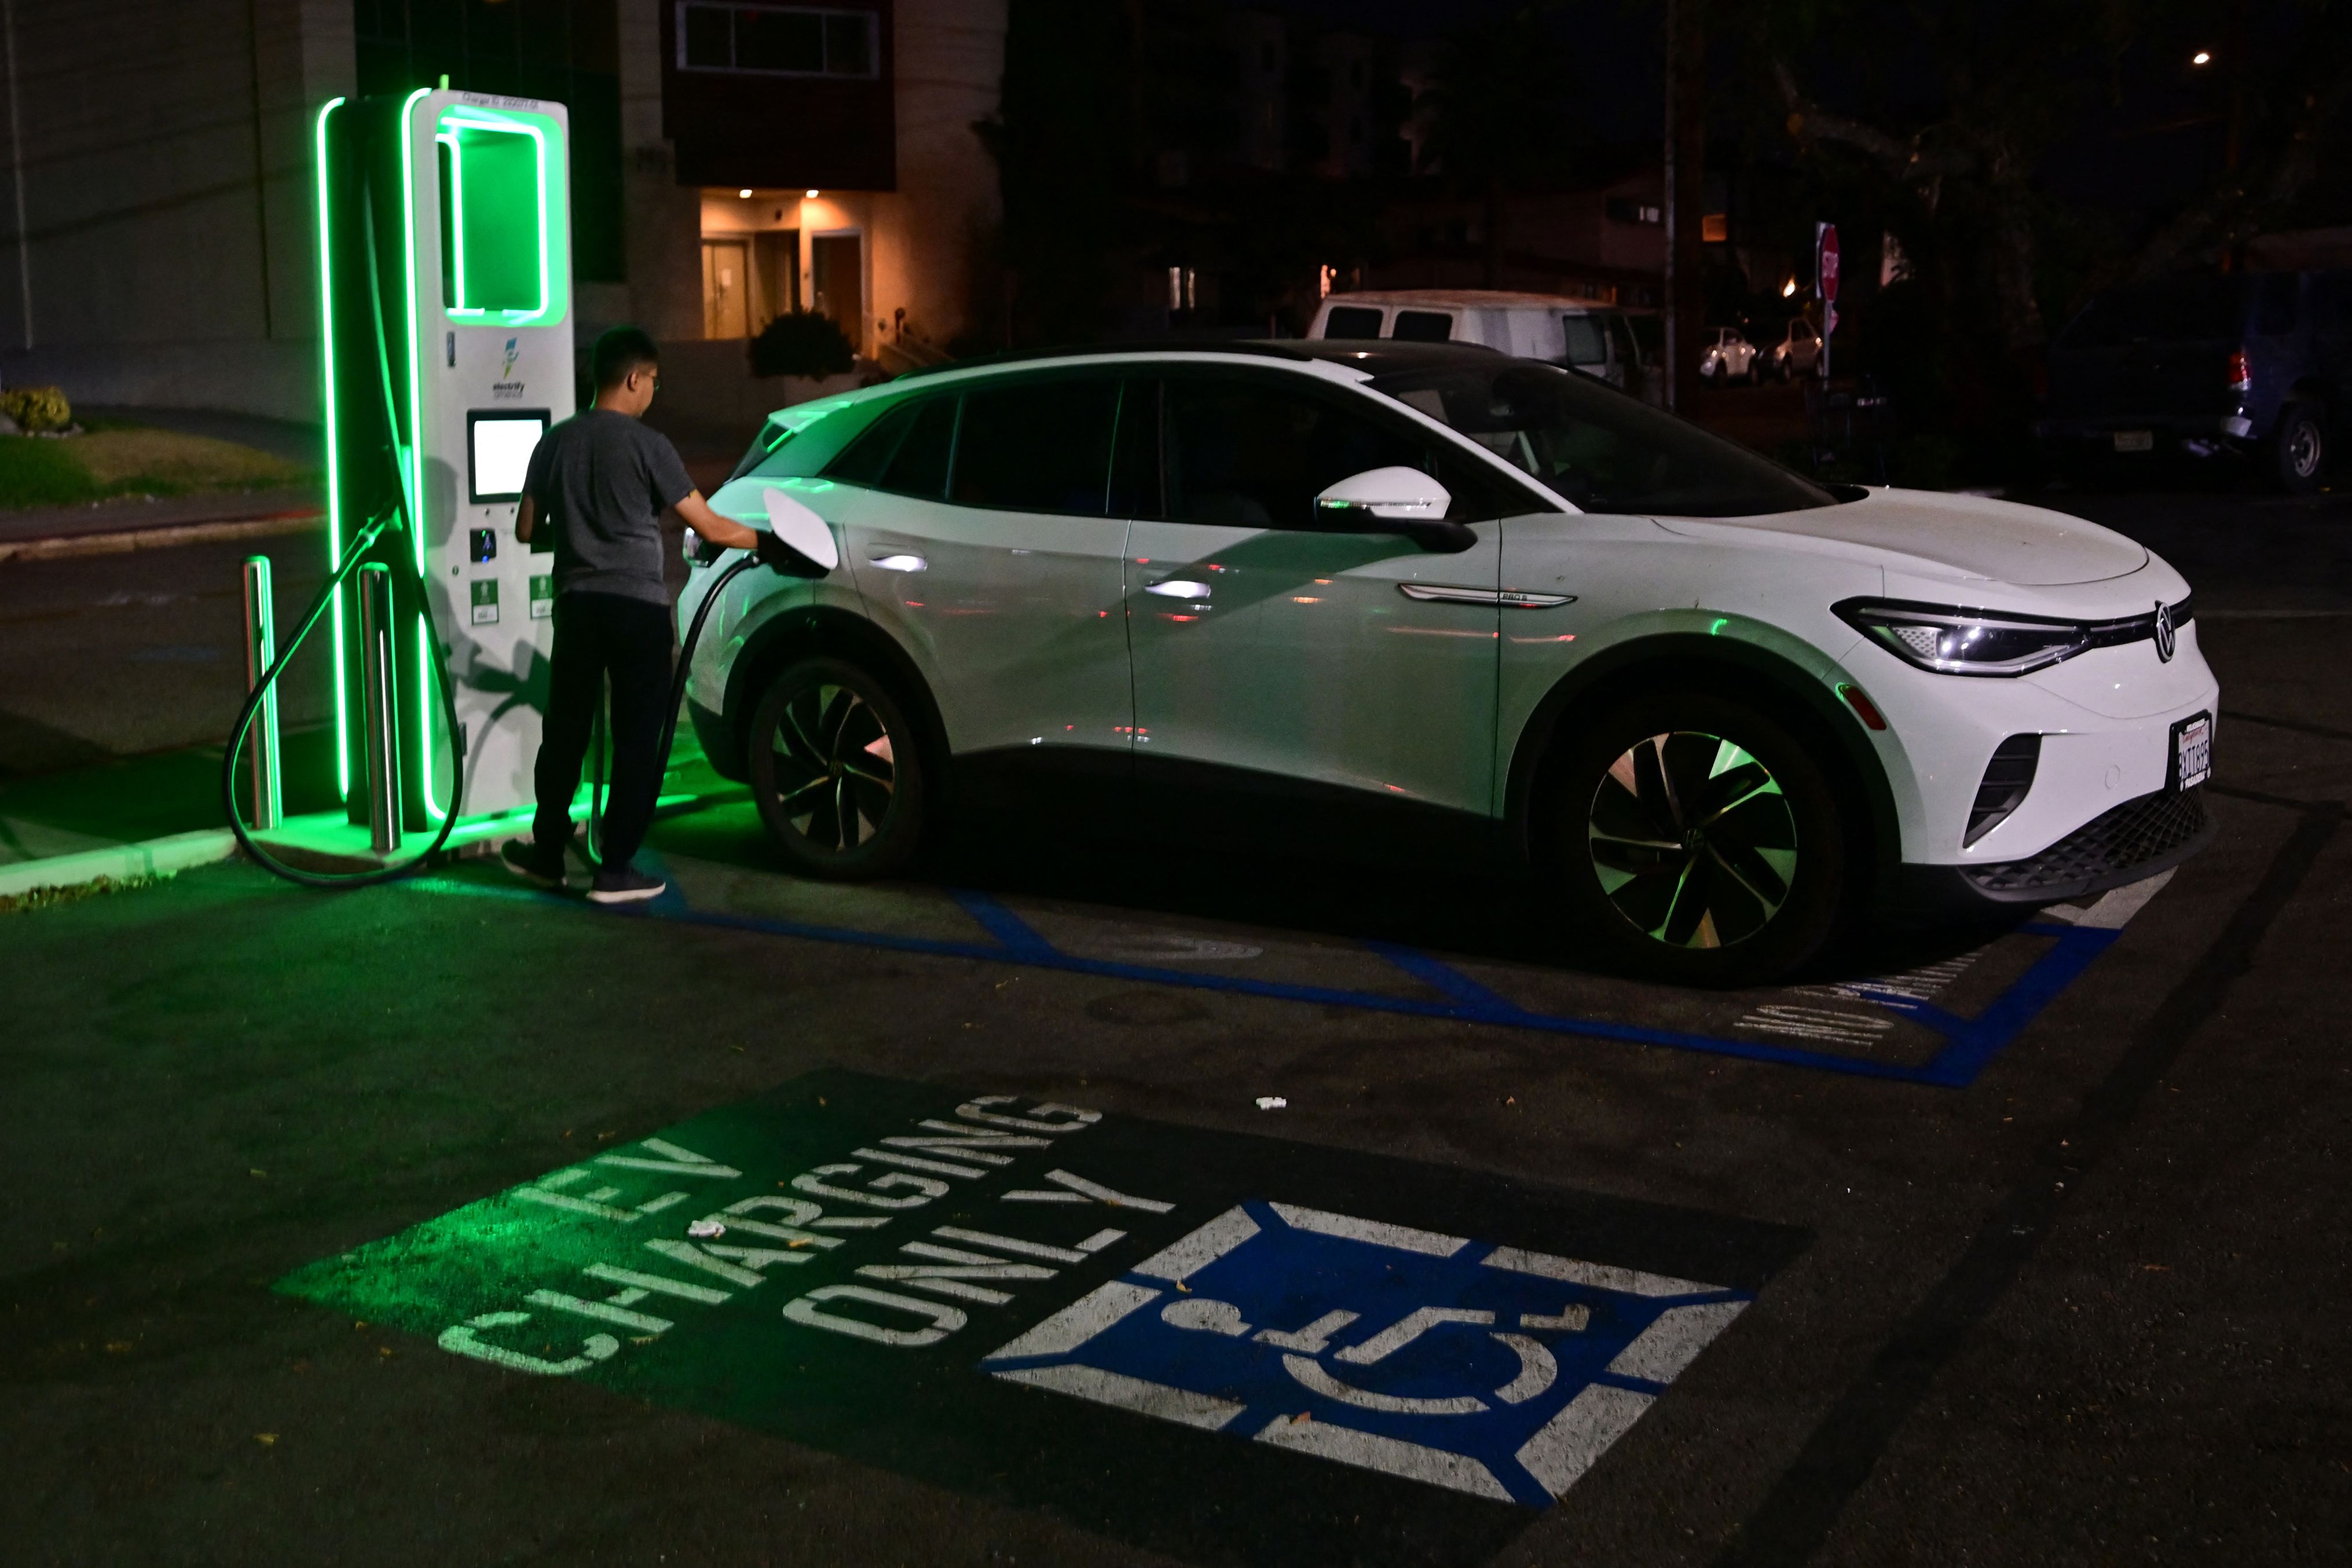 A driver charges his electric vehicle at a charging station as the California Independent System Operator announced a statewide electricity Flex Alert urging conservation to avoid blackouts in Monterey Park, California on August 31, 2022.